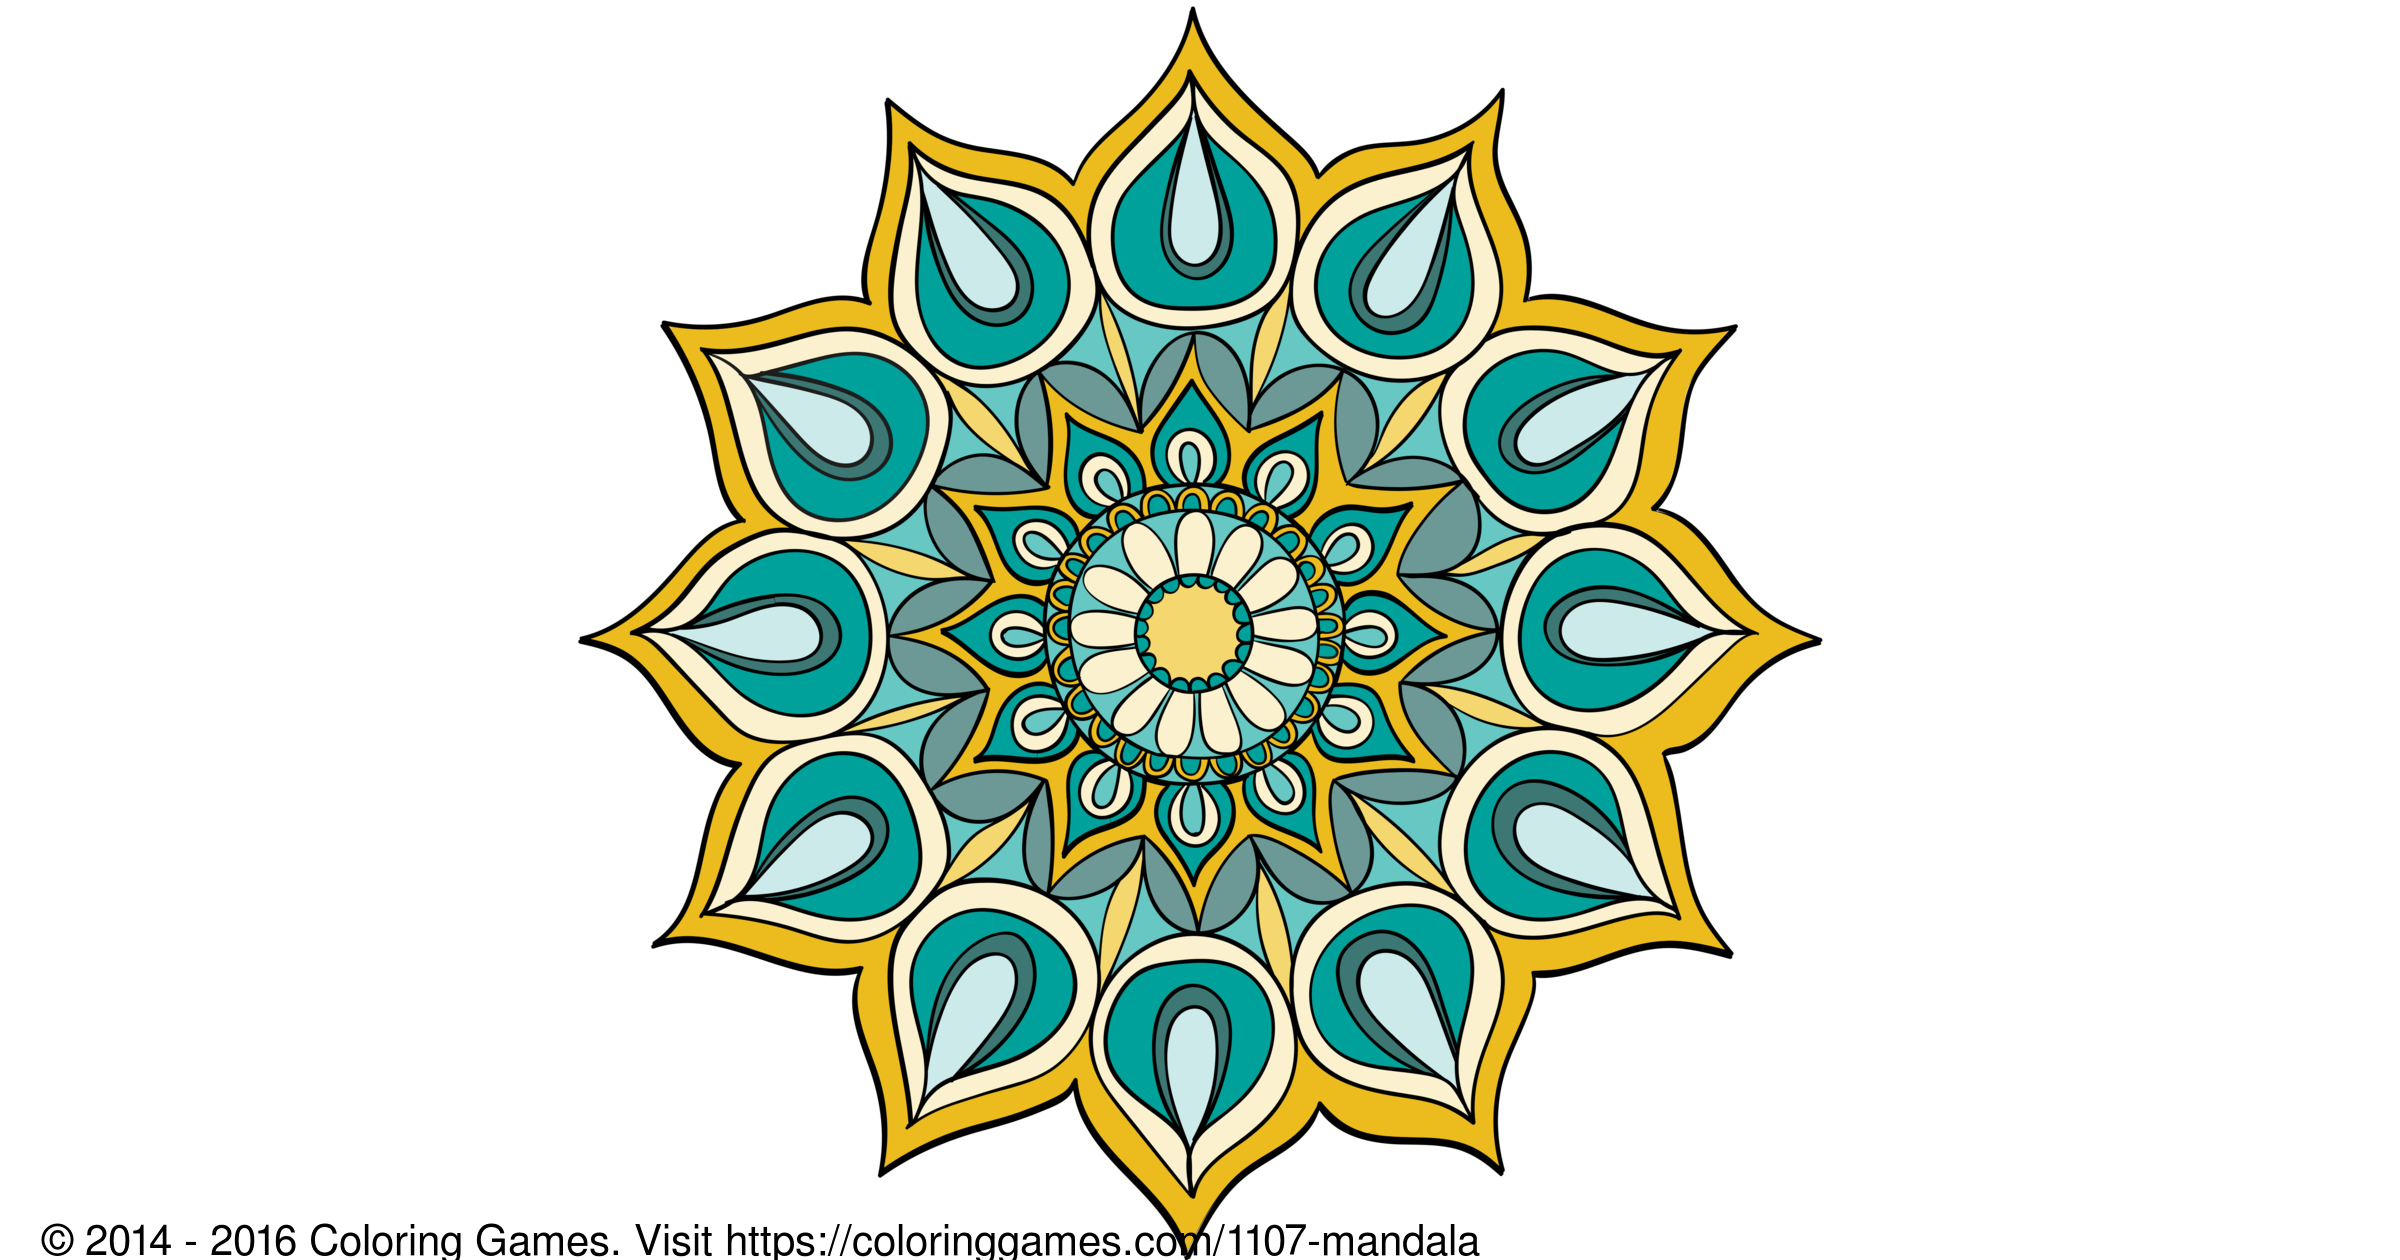 Download Mandala - Coloring Games and Coloring Pages